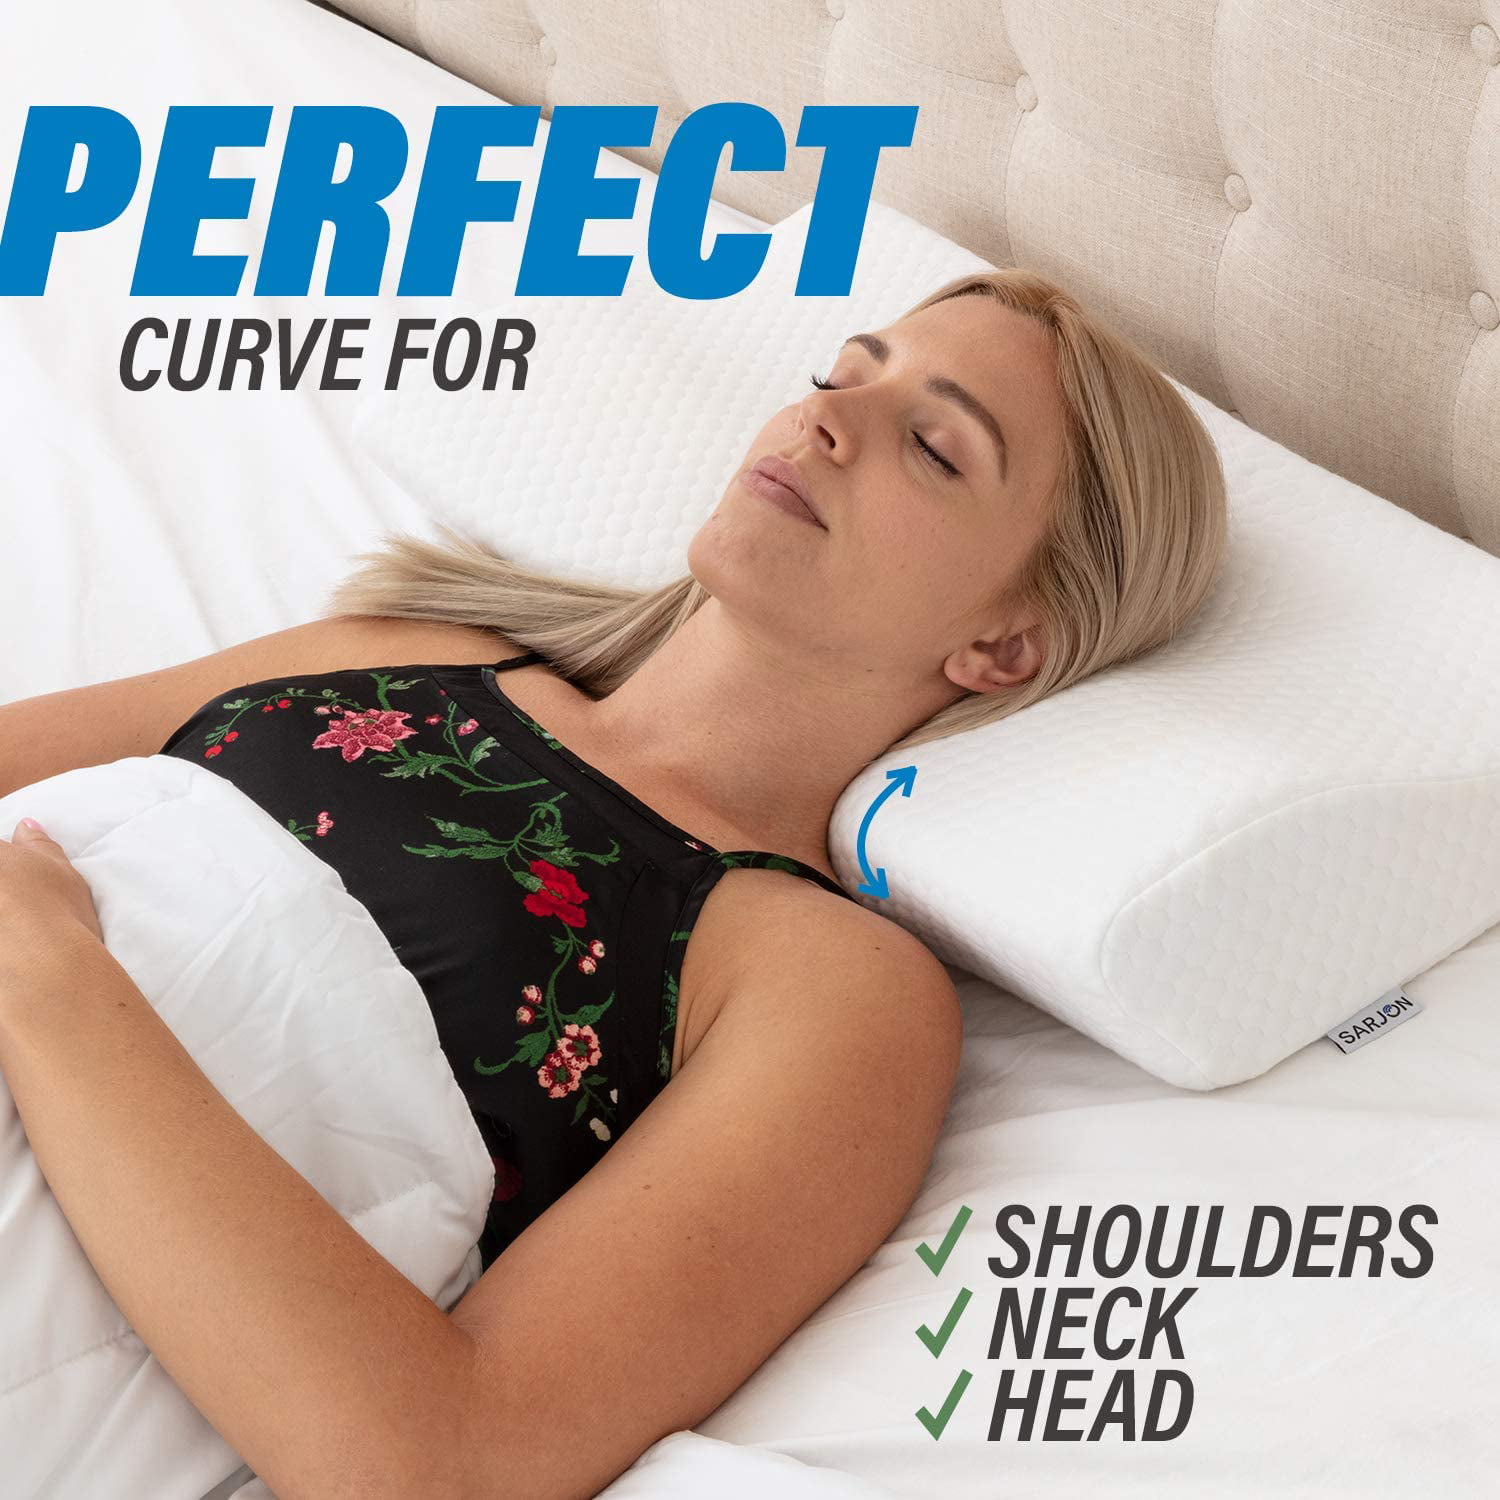 Leyuee Orthopedic Pillows Memory Foam Neck Pillows Cervical Contour Neck Care Pillows Soft Rebound Great for Buffer Head Shoulders Relax Neck Cervical Health Care 